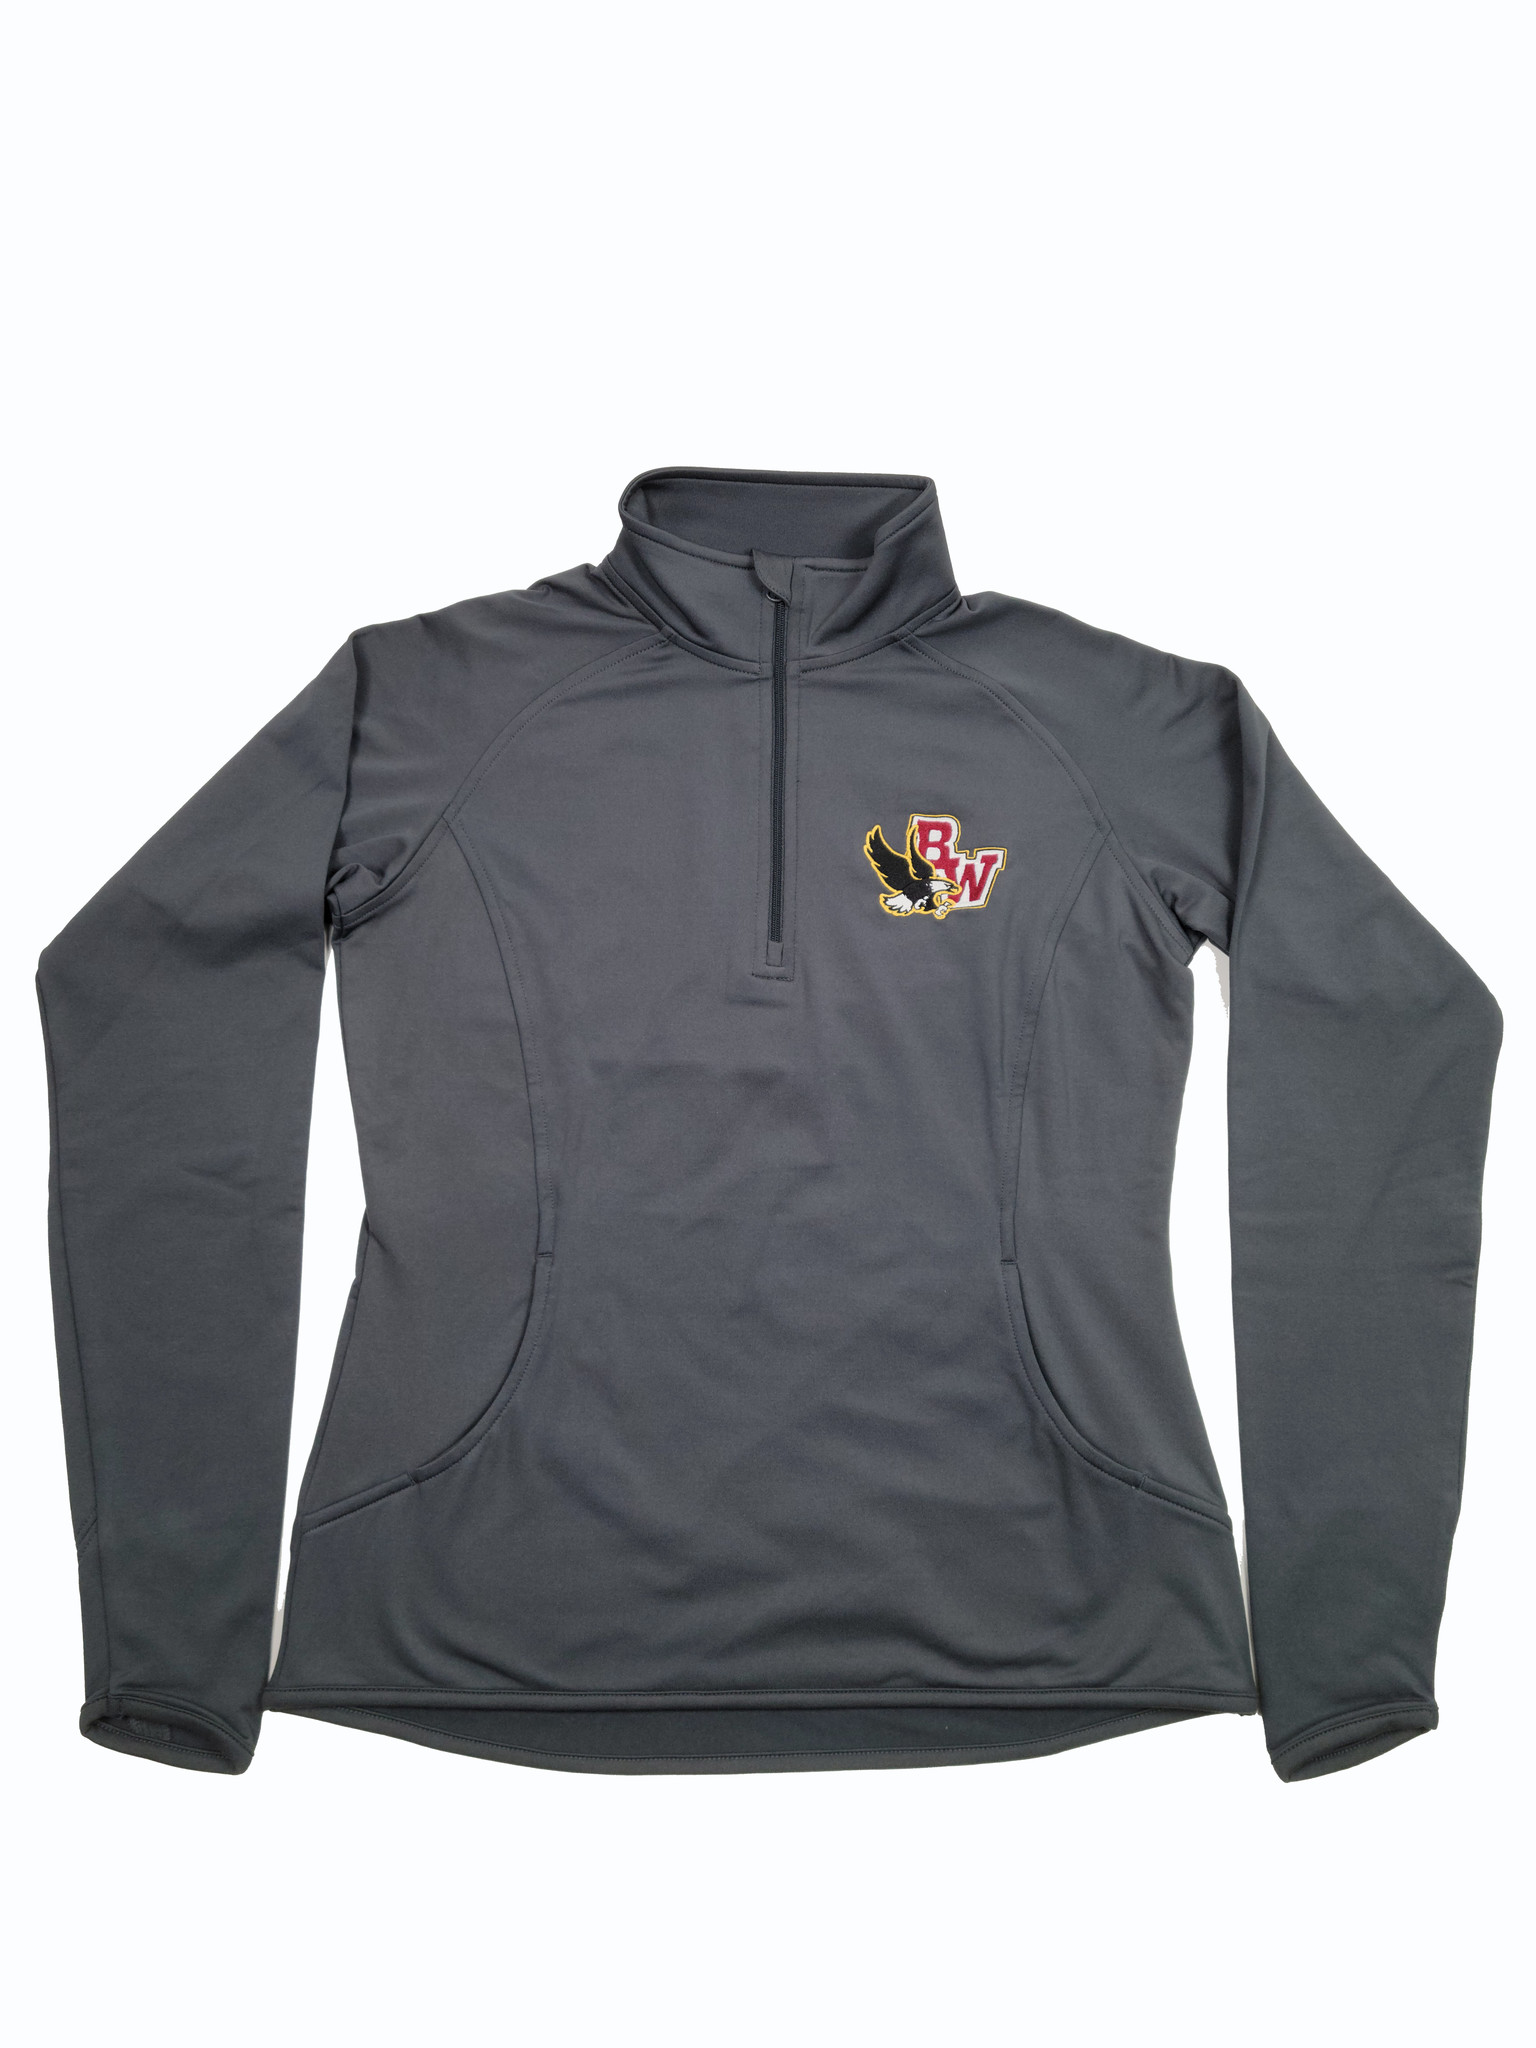 In House Embroidery BISHOP WATTERSON WOMENS 1/4 ZIP WICKING PULLOVER